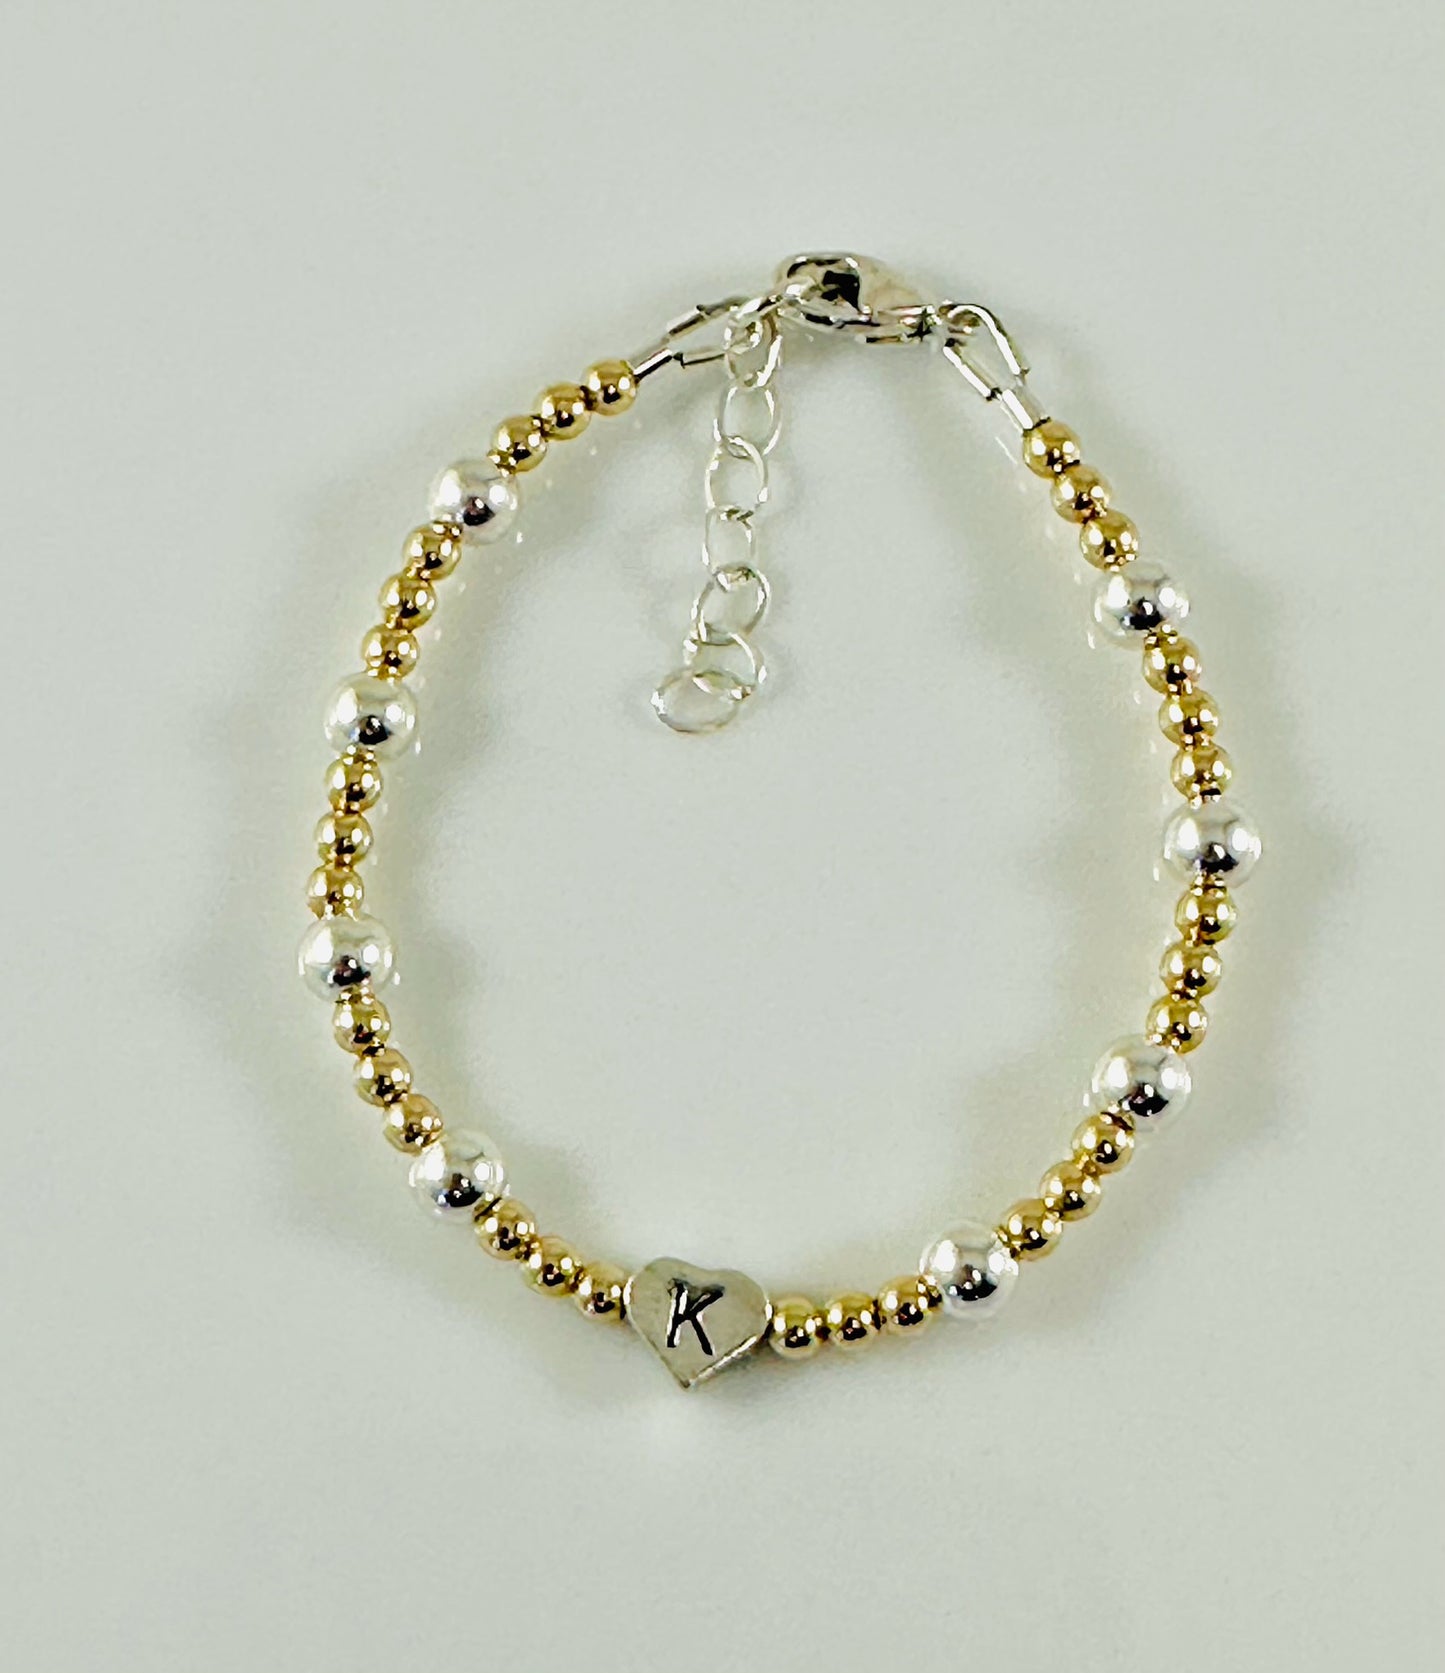 Gold and Silver Personalized Heart Beaded Bracelet